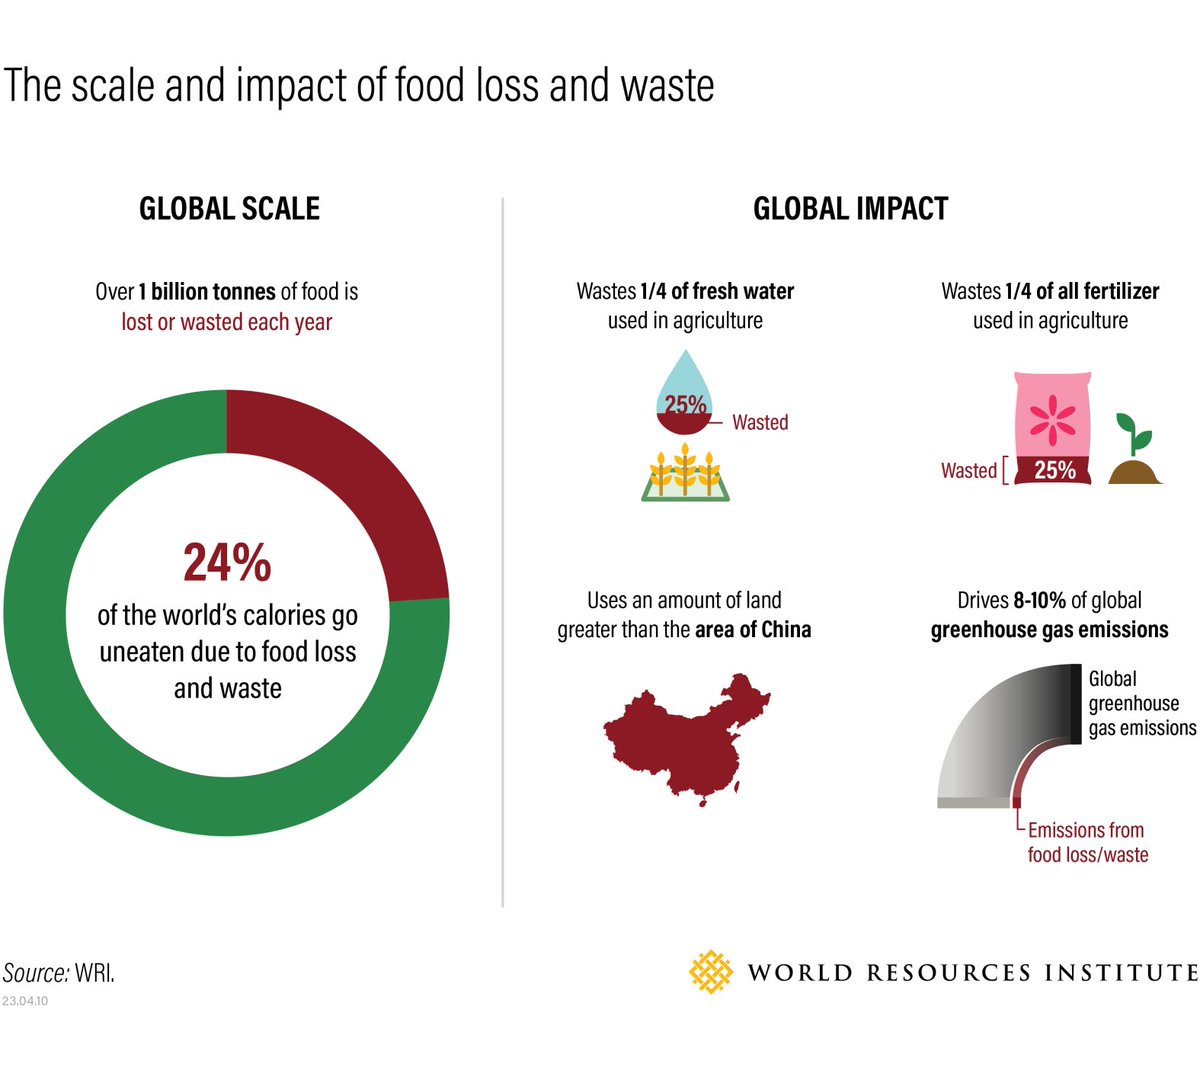 Global benefits of reducing #FoodLossAndWaste 👇

🌍 Improved global nutrition and food security
📉 Reduction of #GHGEmissions
💲 Financial savings for businesses and consumers
🚜 Increased financial security for farmers

bit.ly/3LDHyuM 

#WasteLessFeedMore